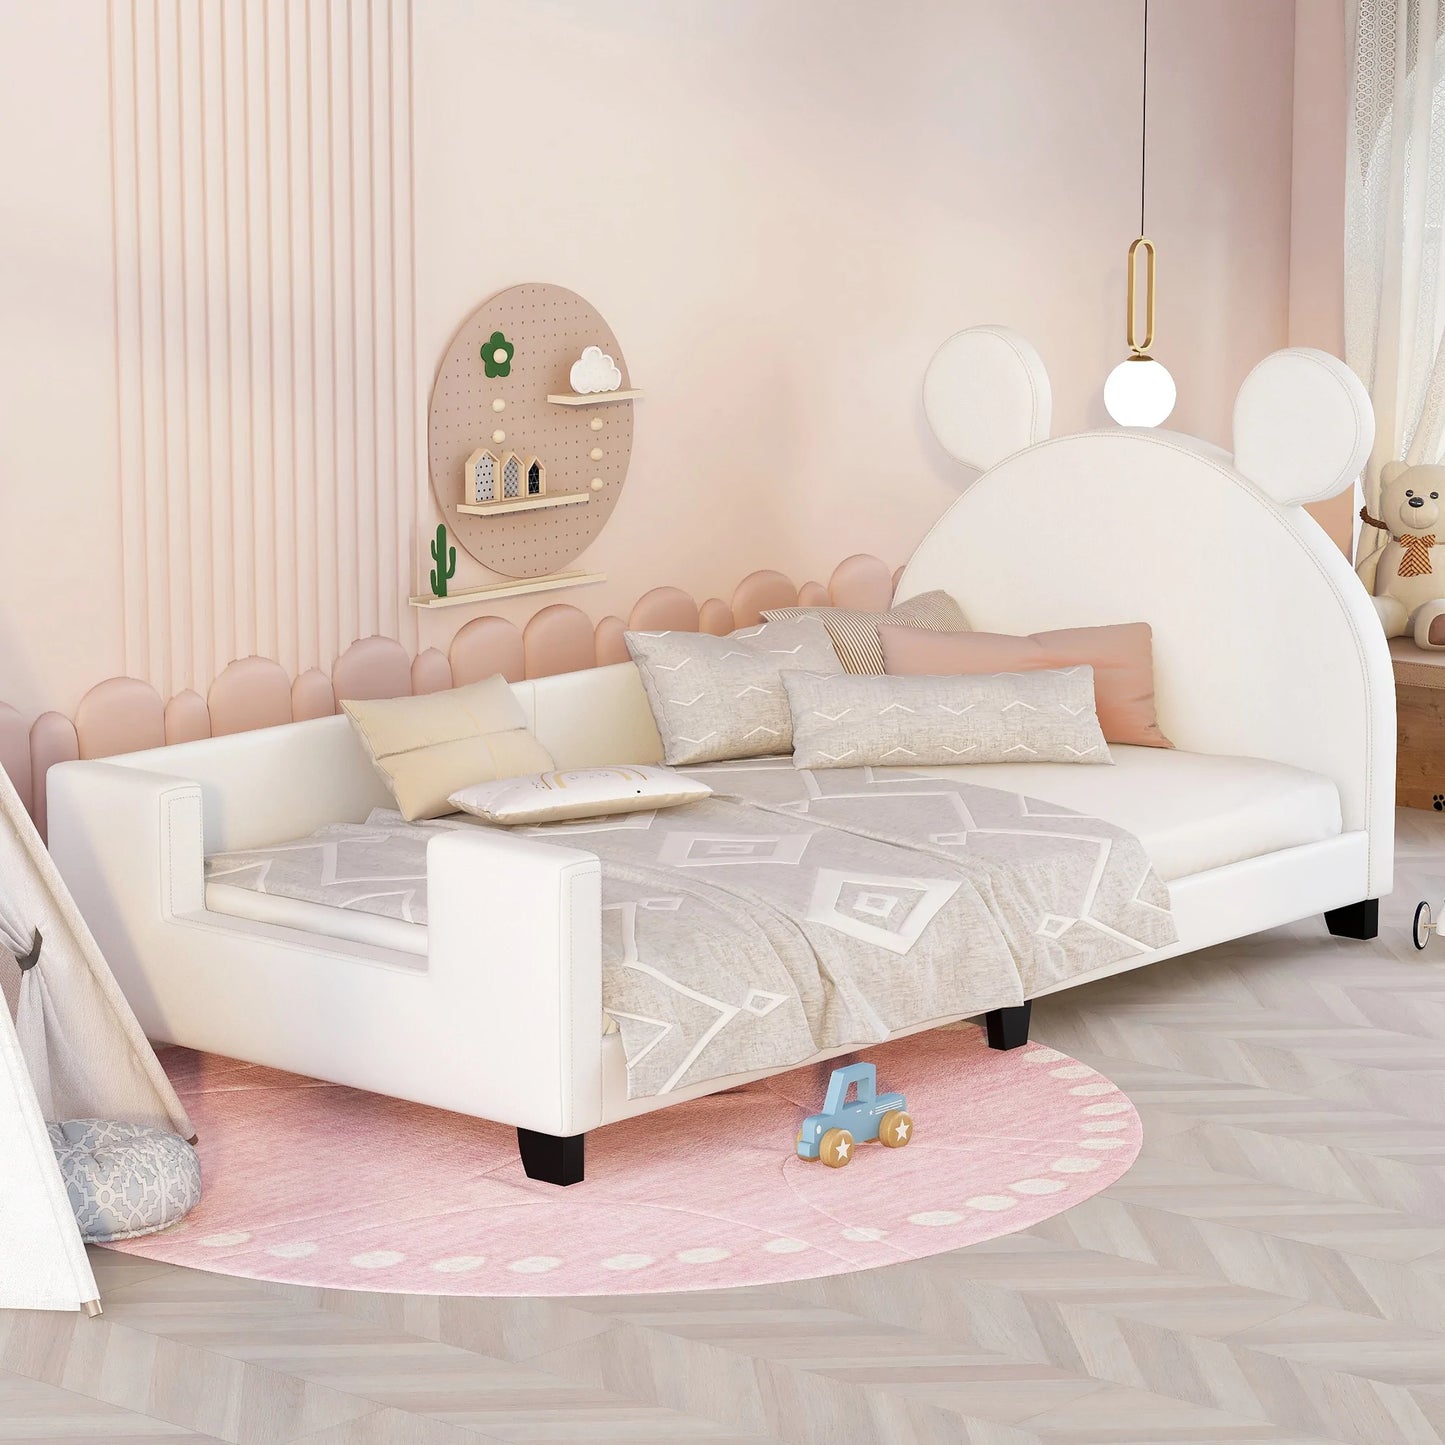 Daybed with Carton Ears Shaped Headboard Twin Size in White